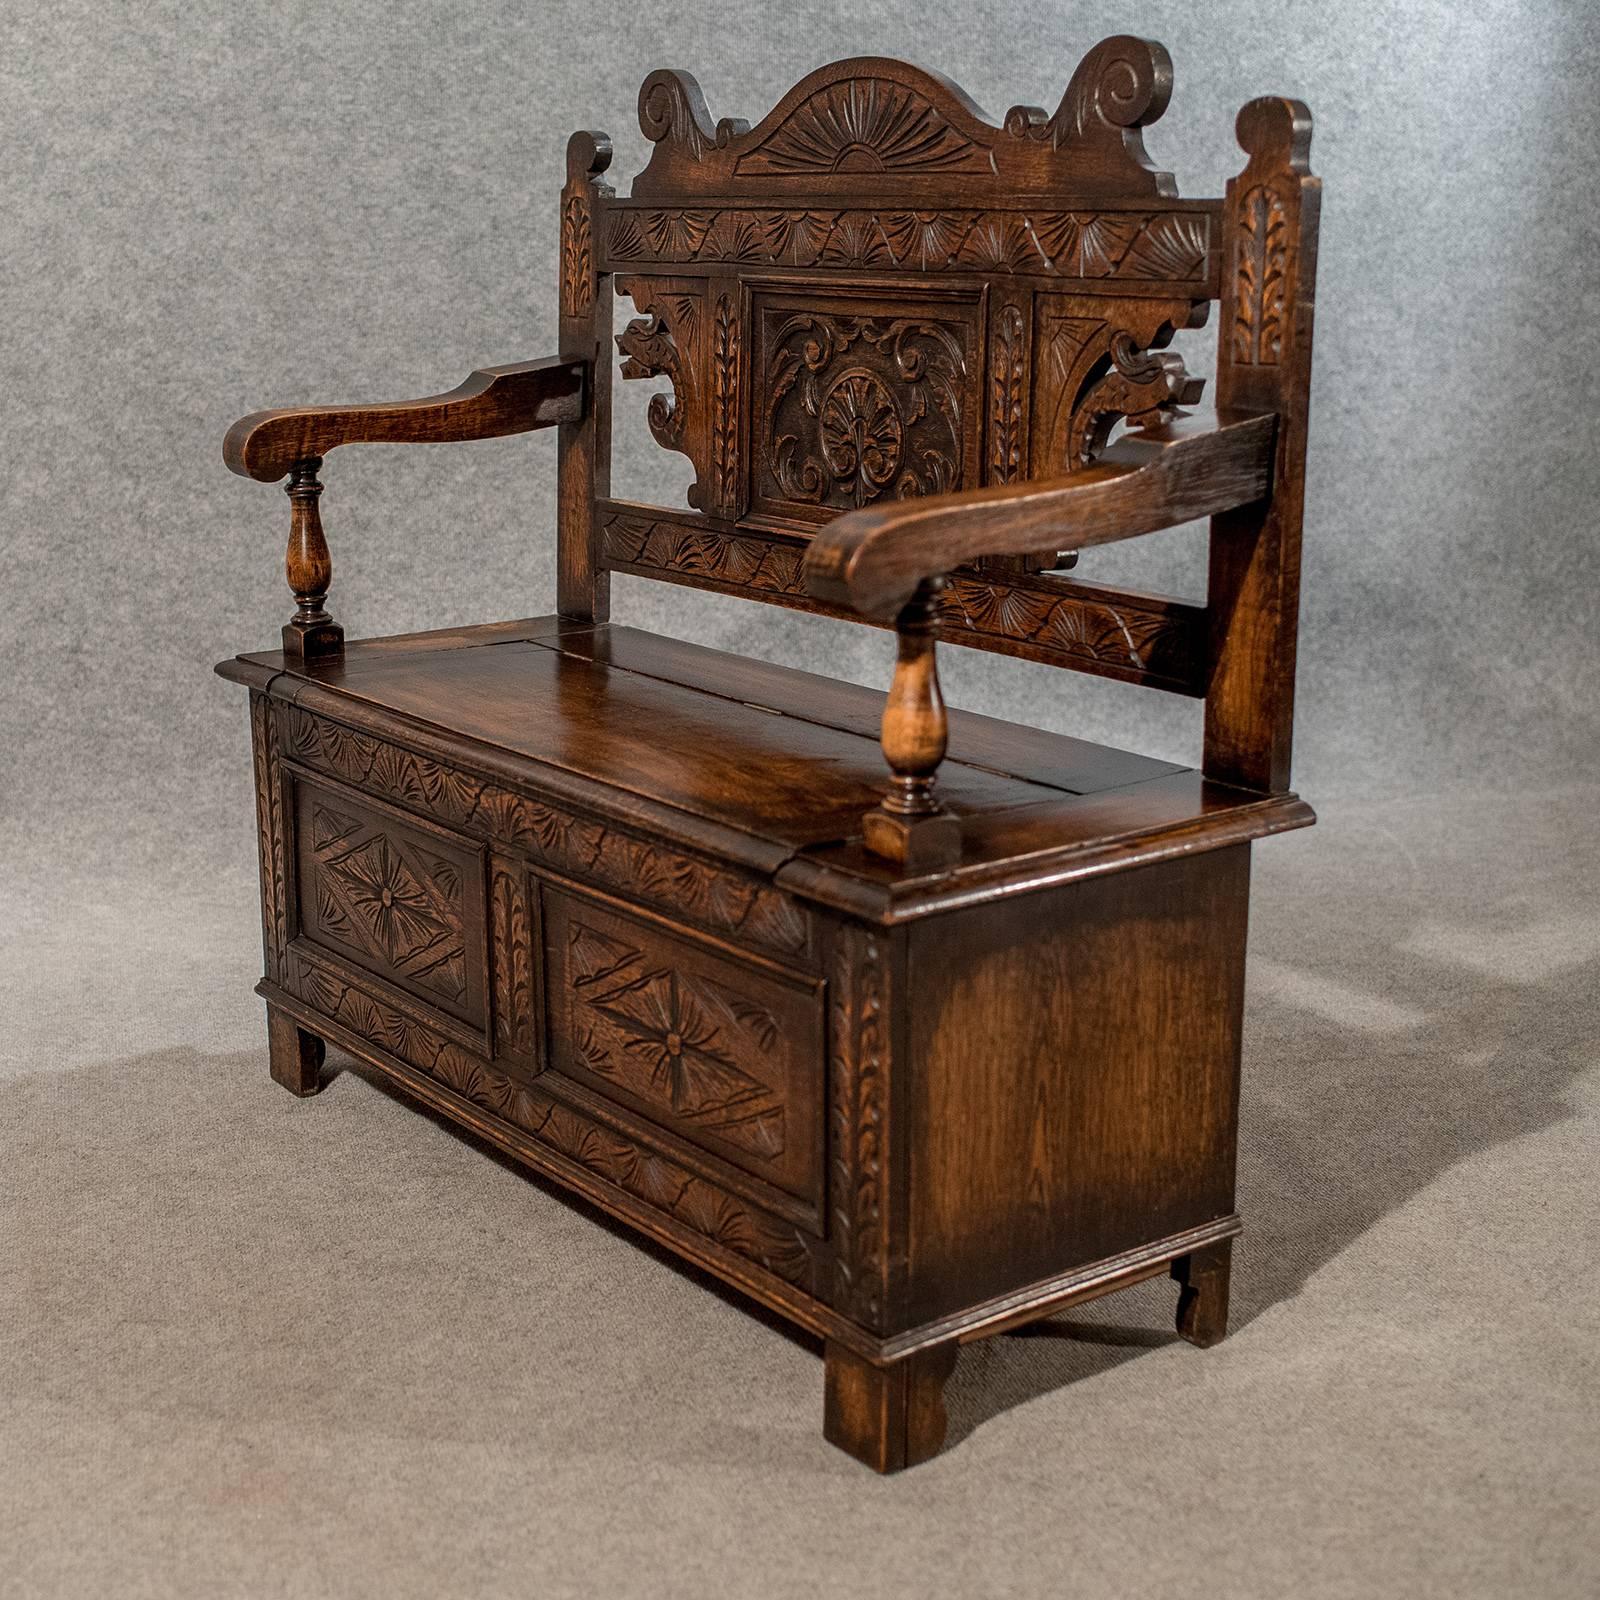 Jacobean Carved Oak Settle Bench Pew Hall Seat with Locker, English, Mid-20th Century